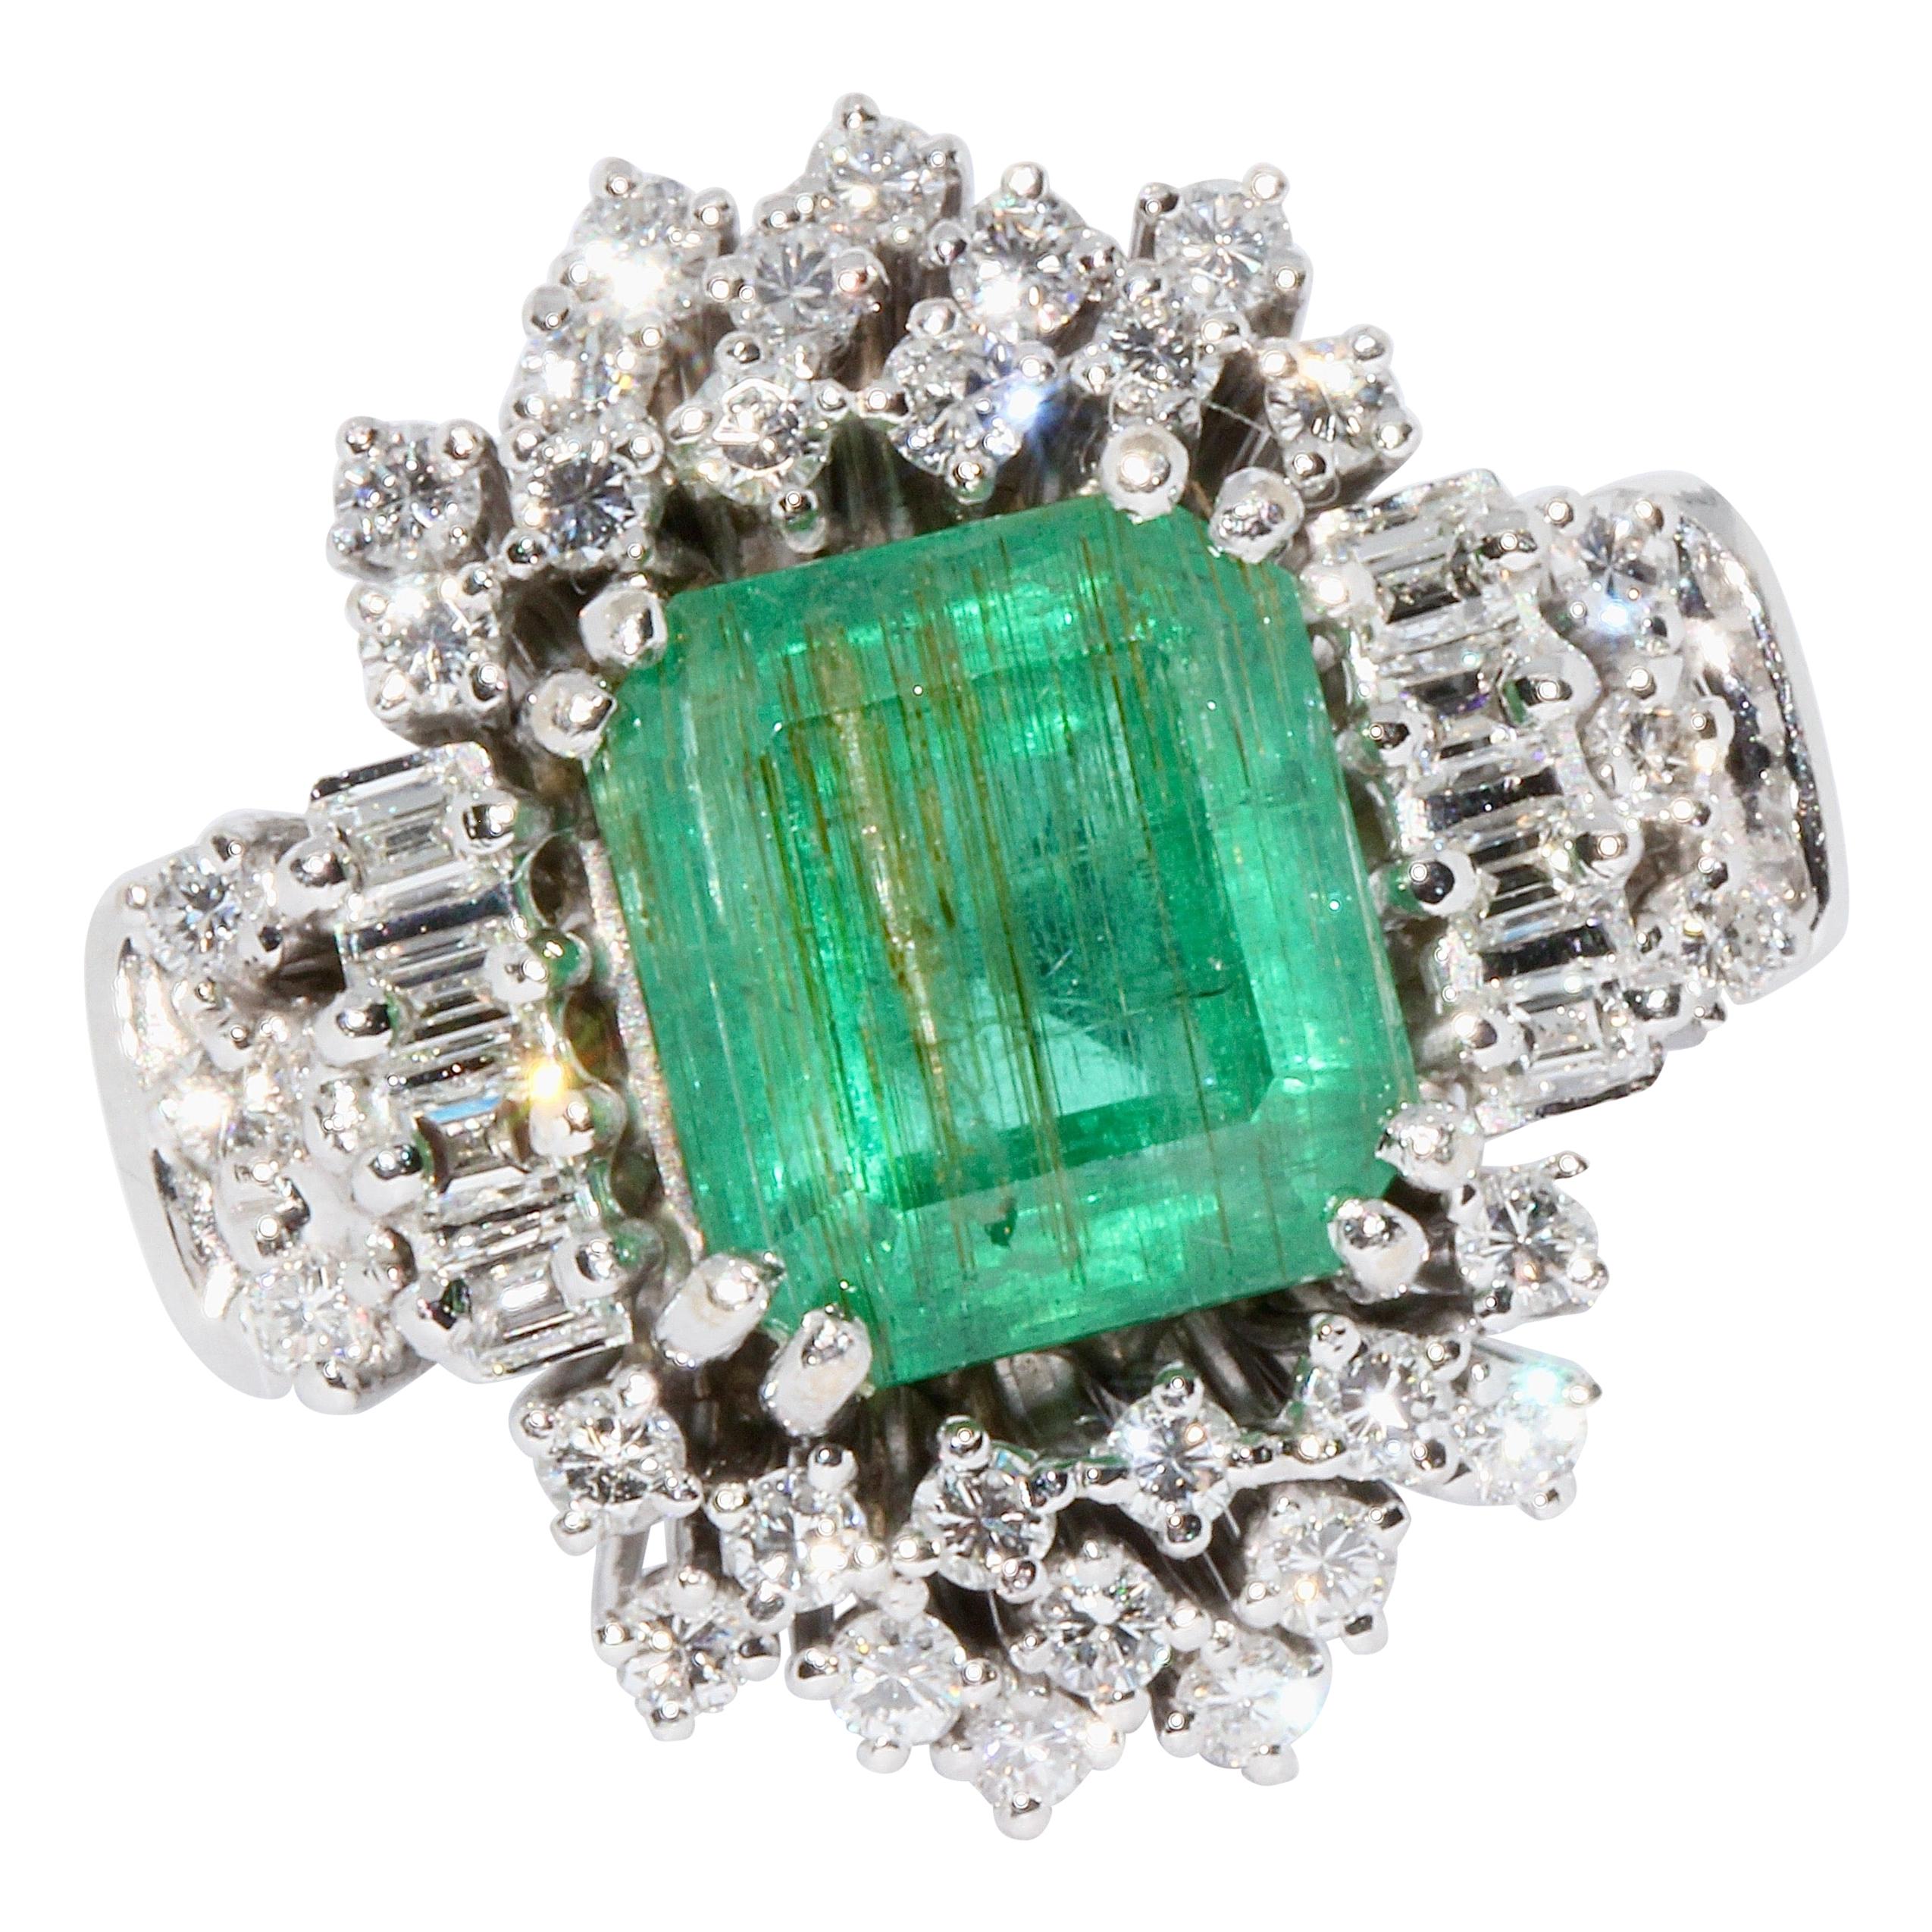 18 Karat White Gold Ring Set with White Diamonds and Large 4.5 Carat Emerald For Sale